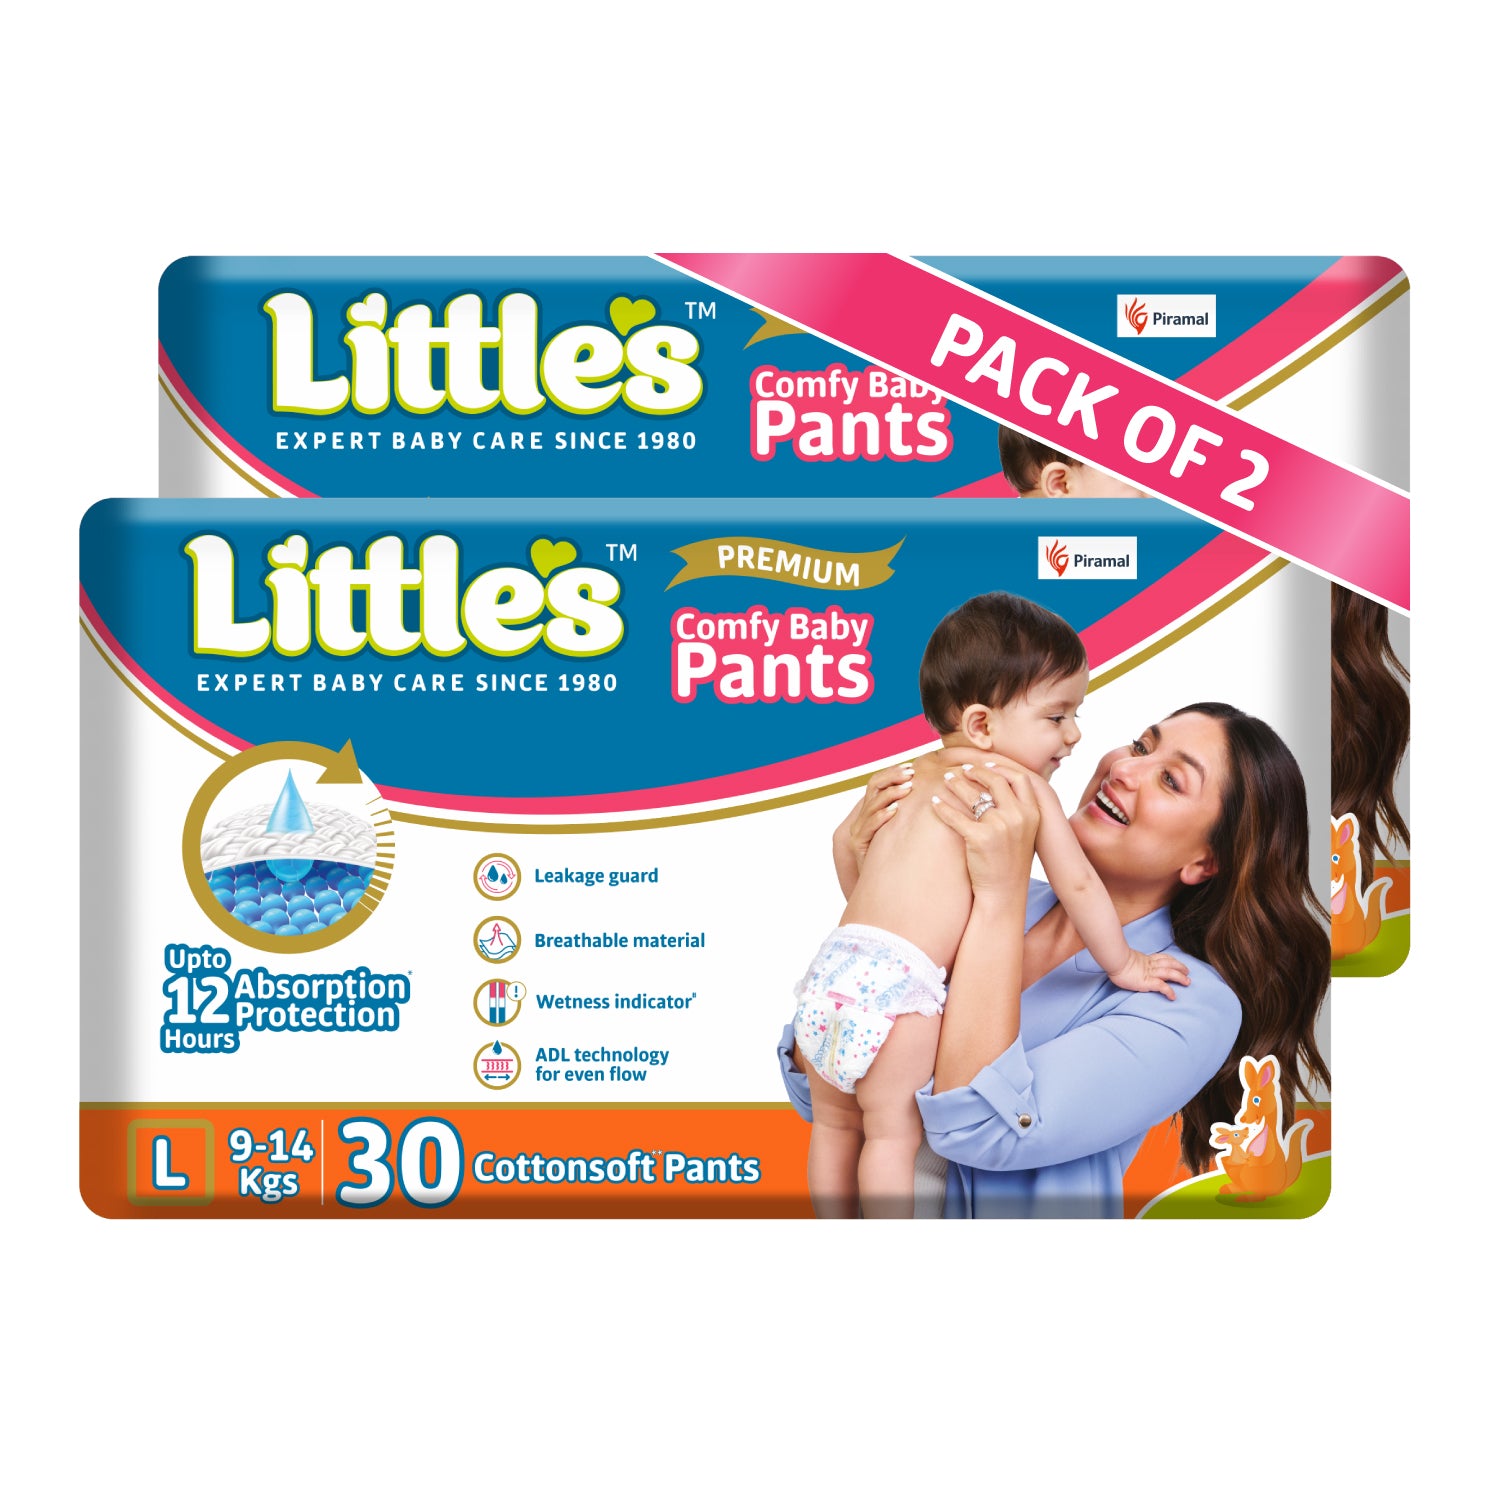 Little's Baby Pants Diapers with Wetness Indicator & 12 Hours Absorption, cottonsoft pants diaper large size combo